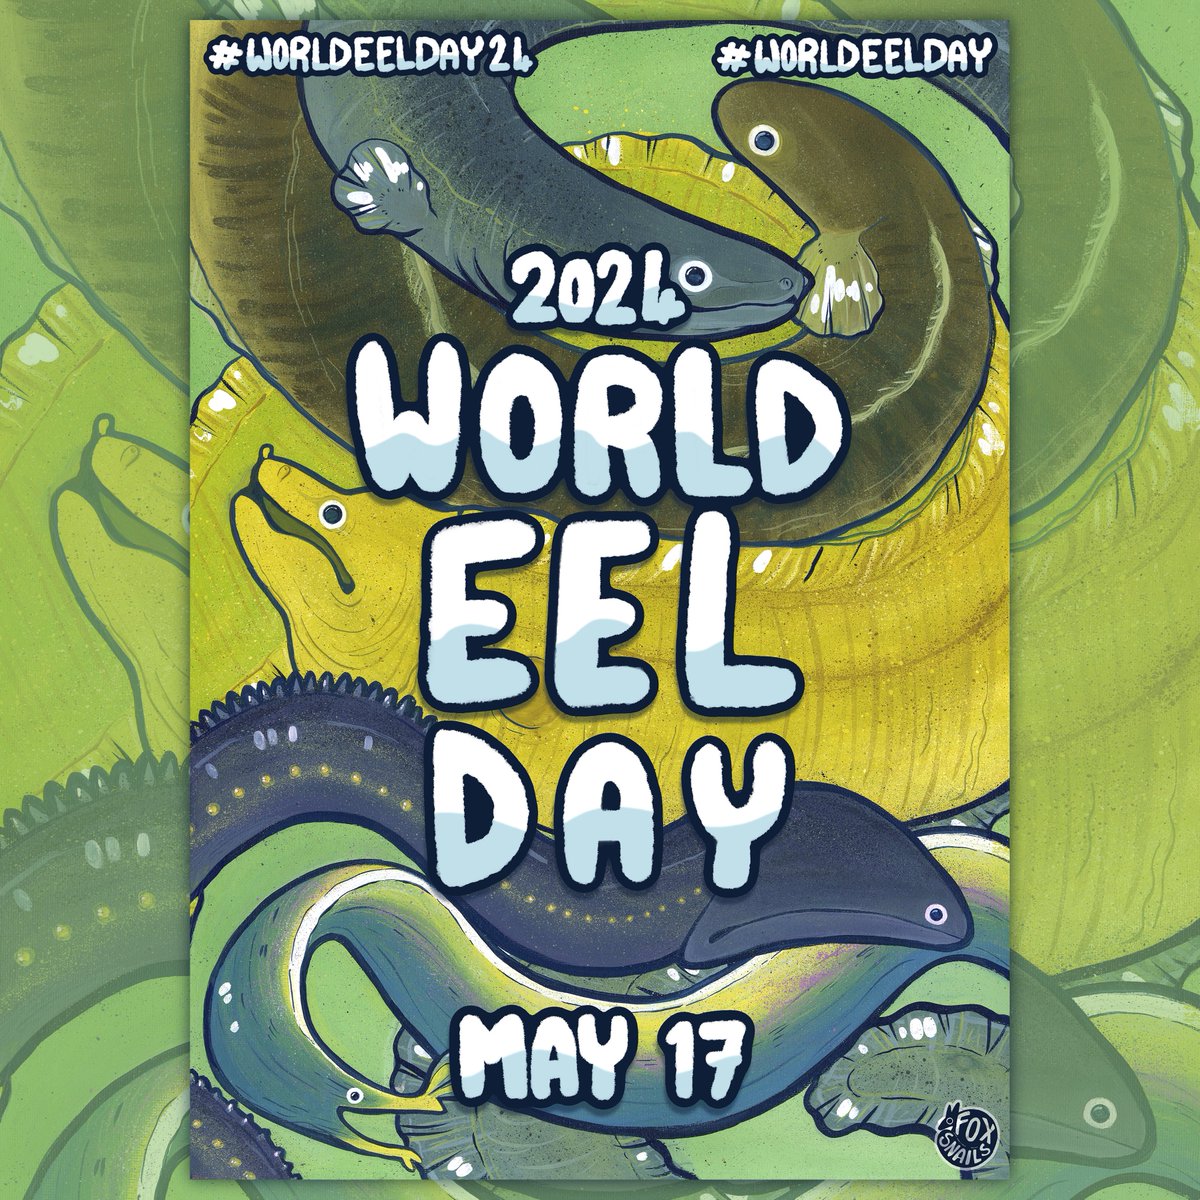 After a successful World Eel Day 2023, with live events in four countries and two continents, we are preparing for World Eel Day 2024! huge thanks to @FoxSnails for another brilliant poster. Please contact ruthie@ruthiecollins.co.uk with ideas to add to programme #worldeelday